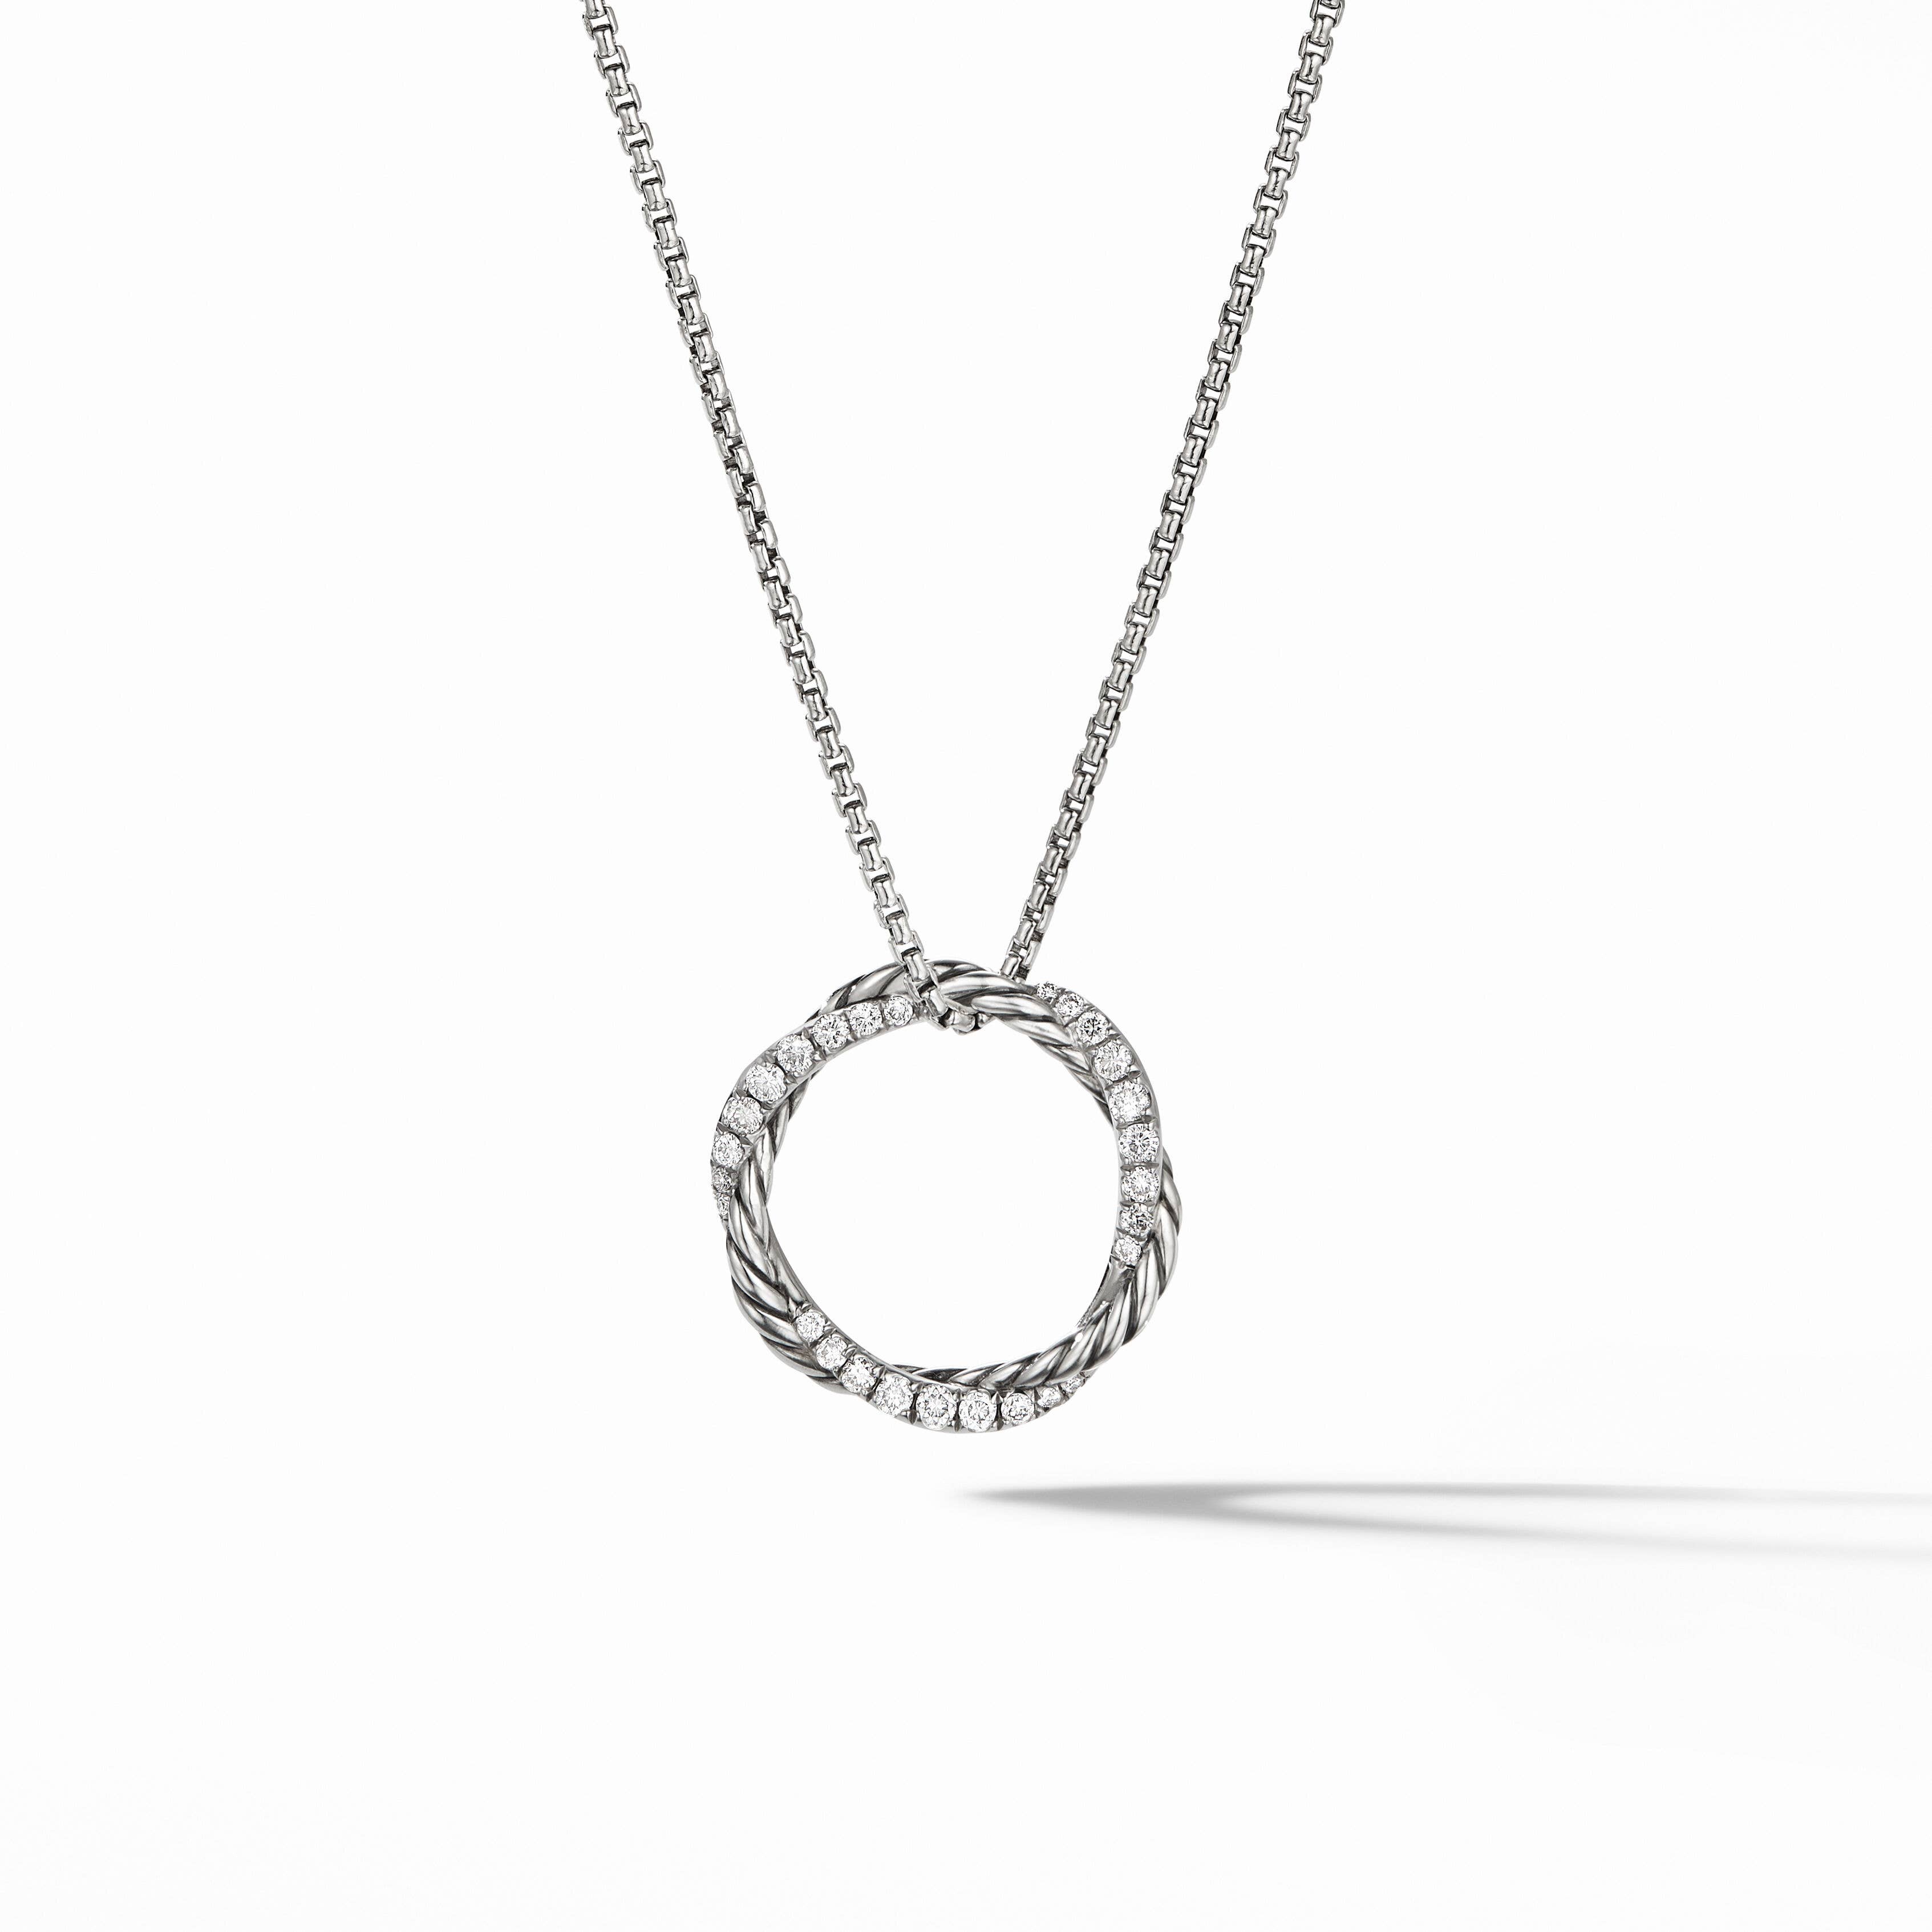 Petite Infinity Pendant Necklace in Sterling Silver with Pavé Diamonds